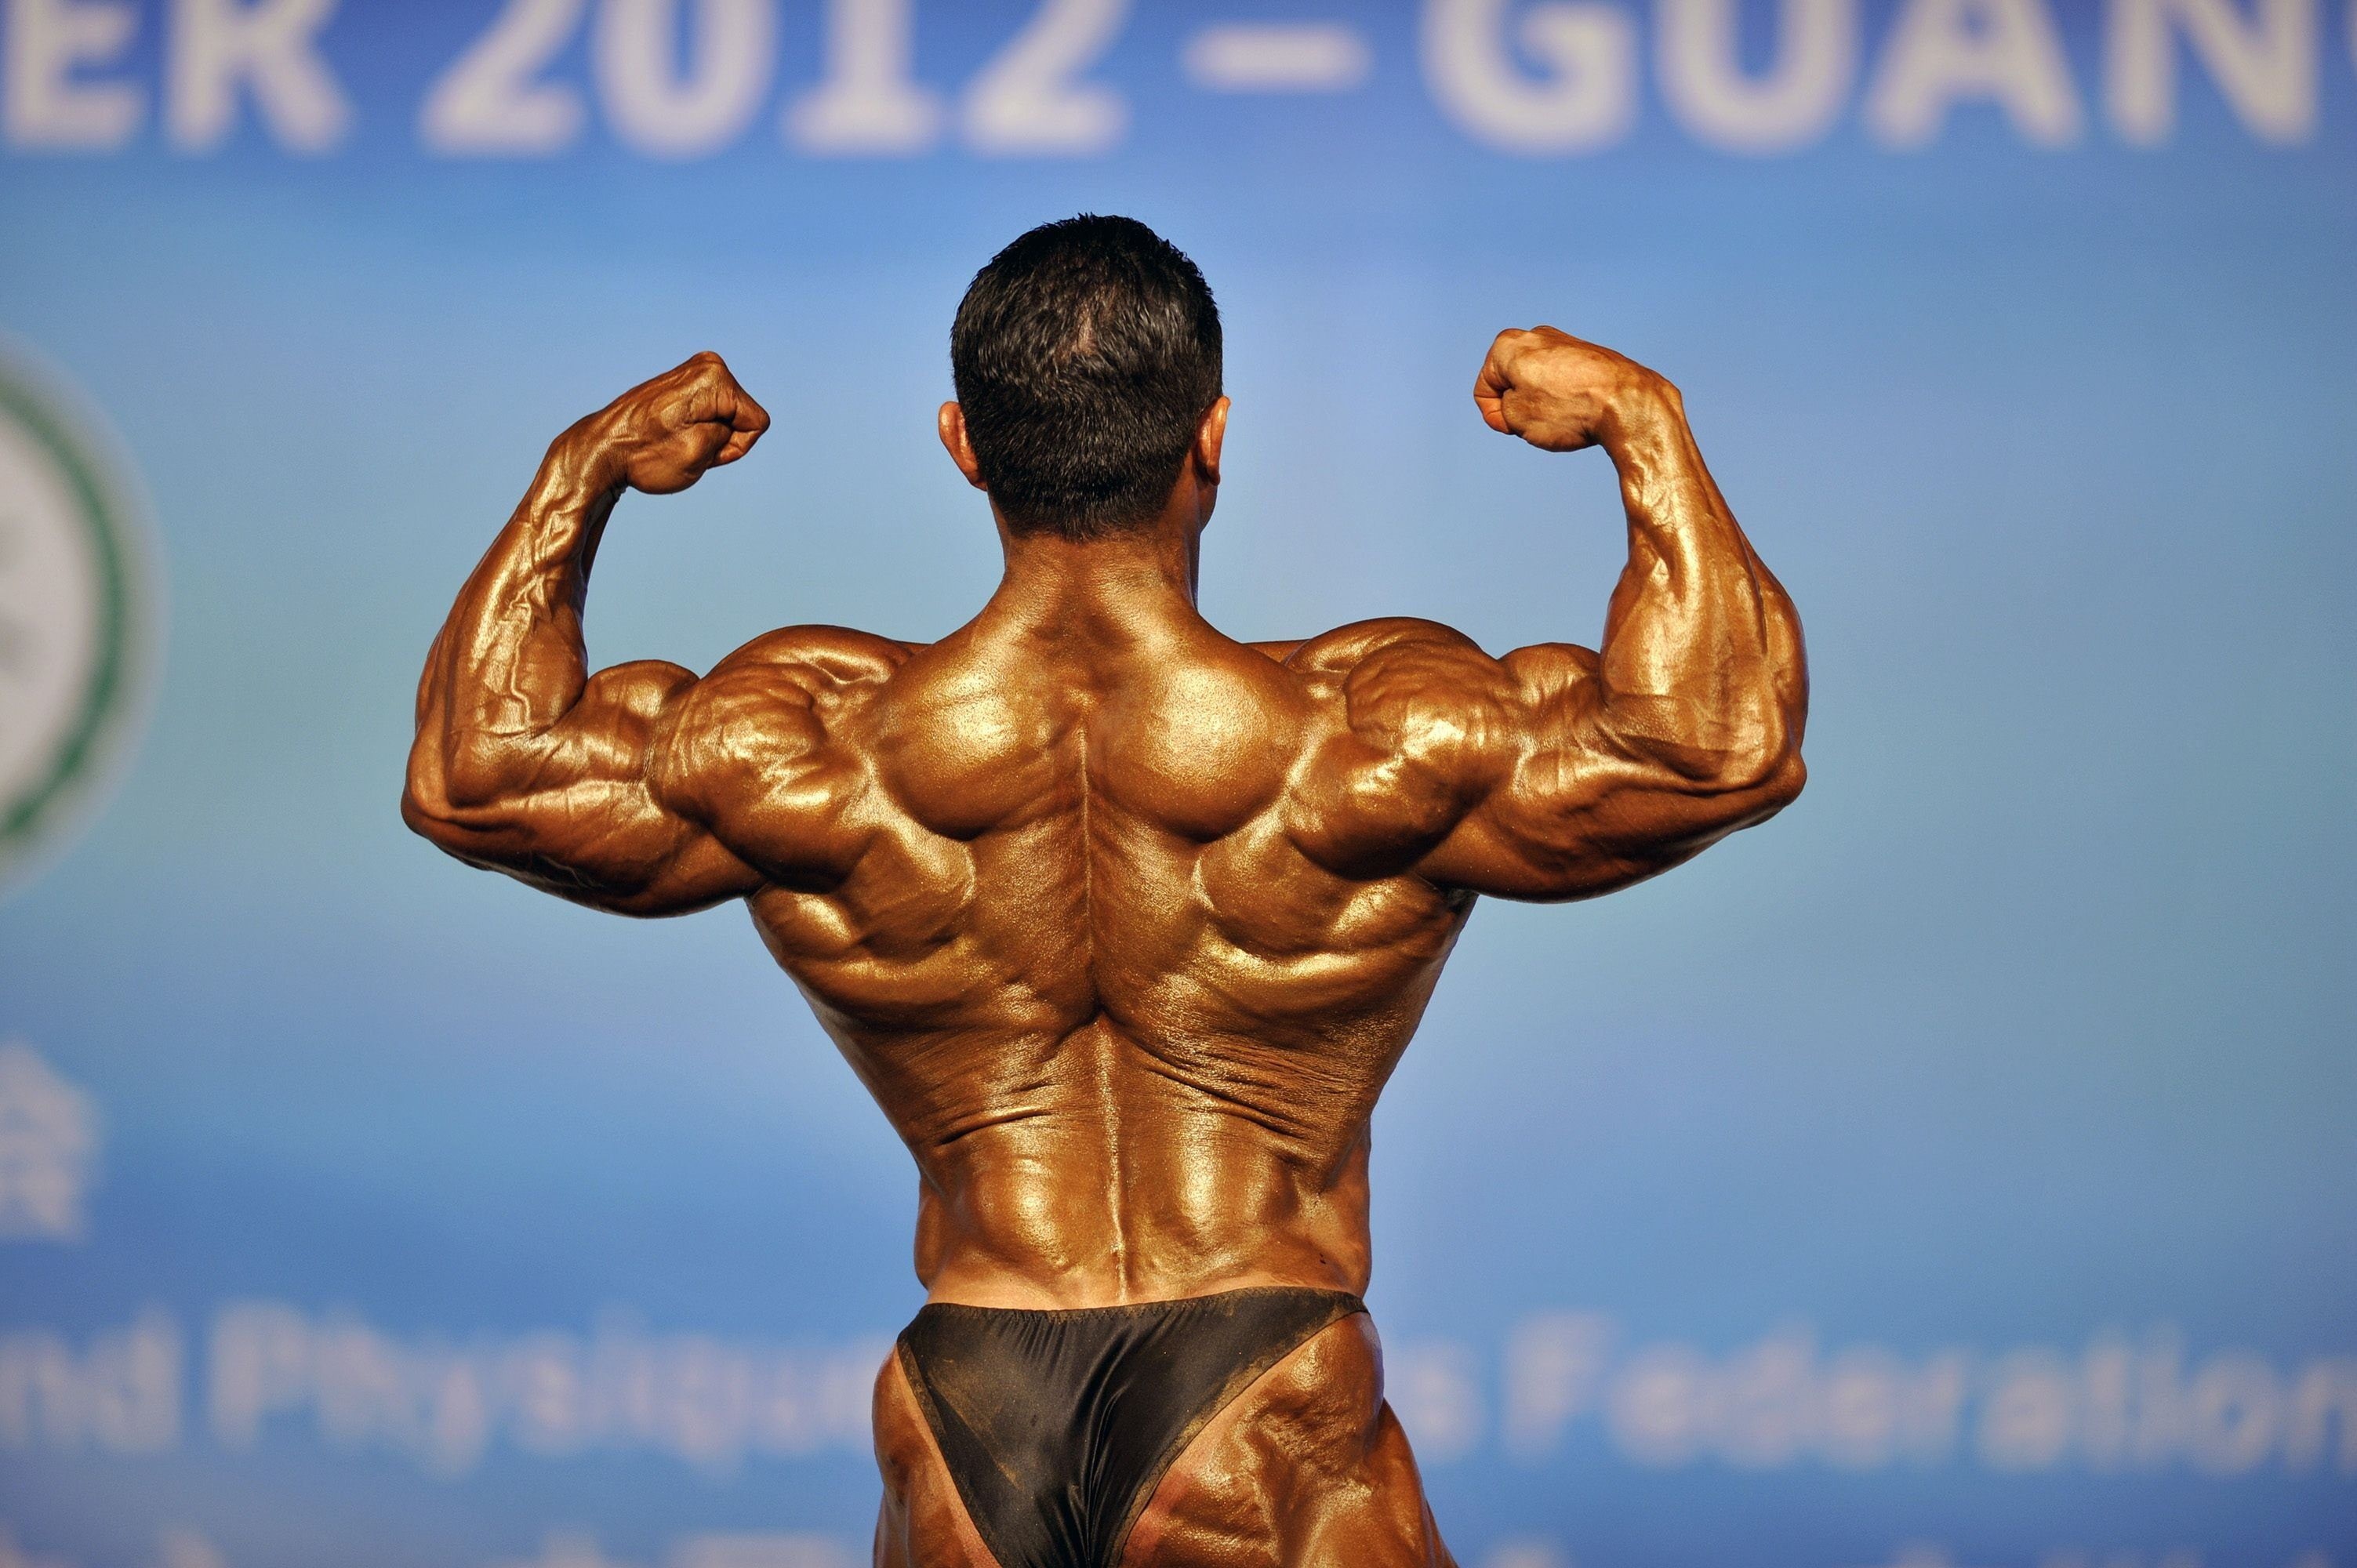 Bodybuilding: Posing routine, Muscularity, Stage presentation, Competitive exhibition. 3010x2000 HD Wallpaper.